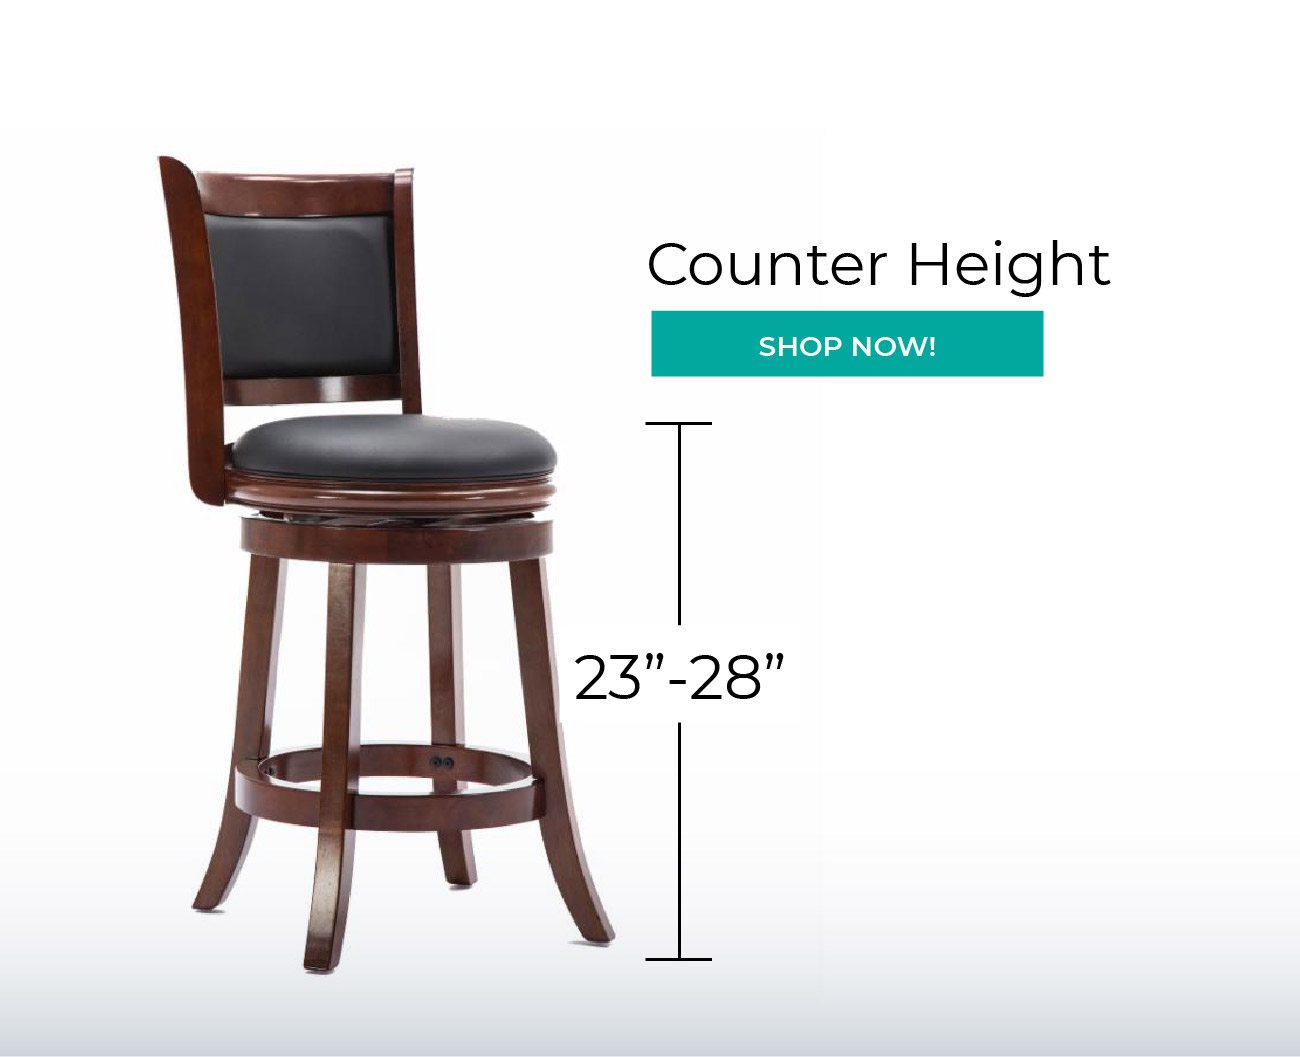 Counter Height